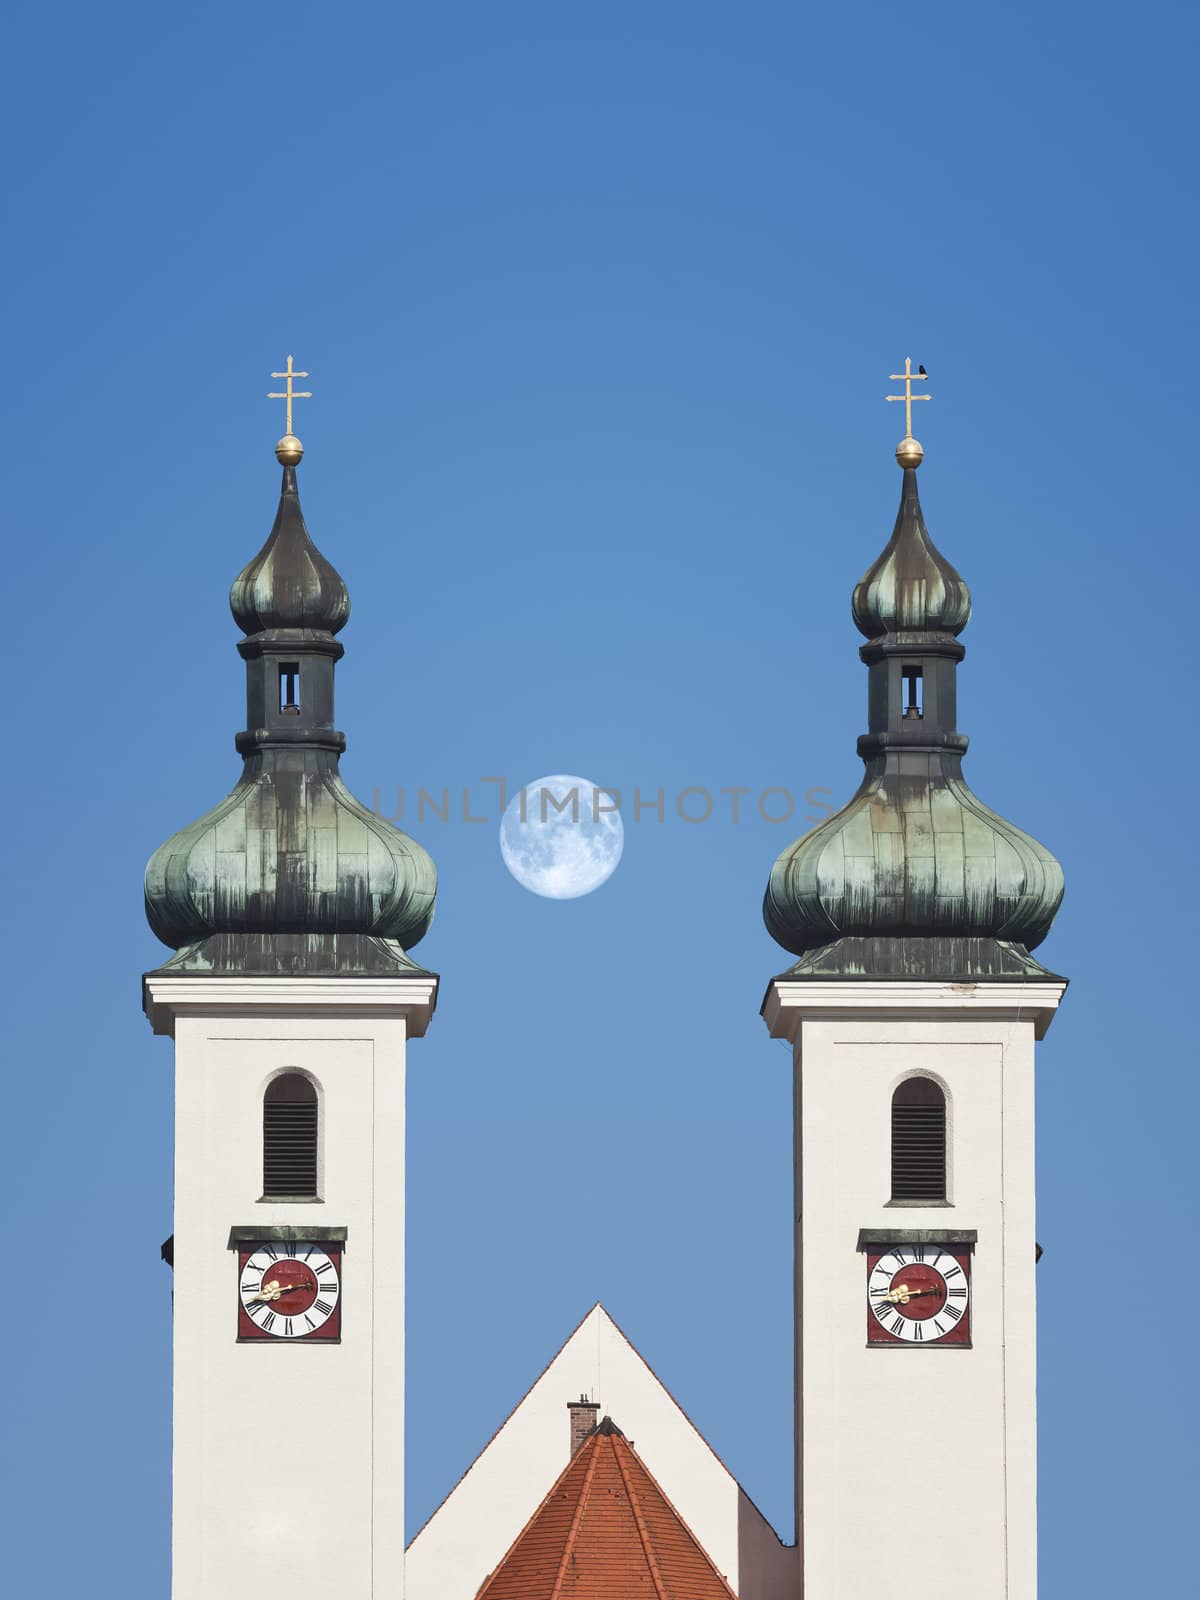 An image of the church towers in Tutzing Bavaria Germany